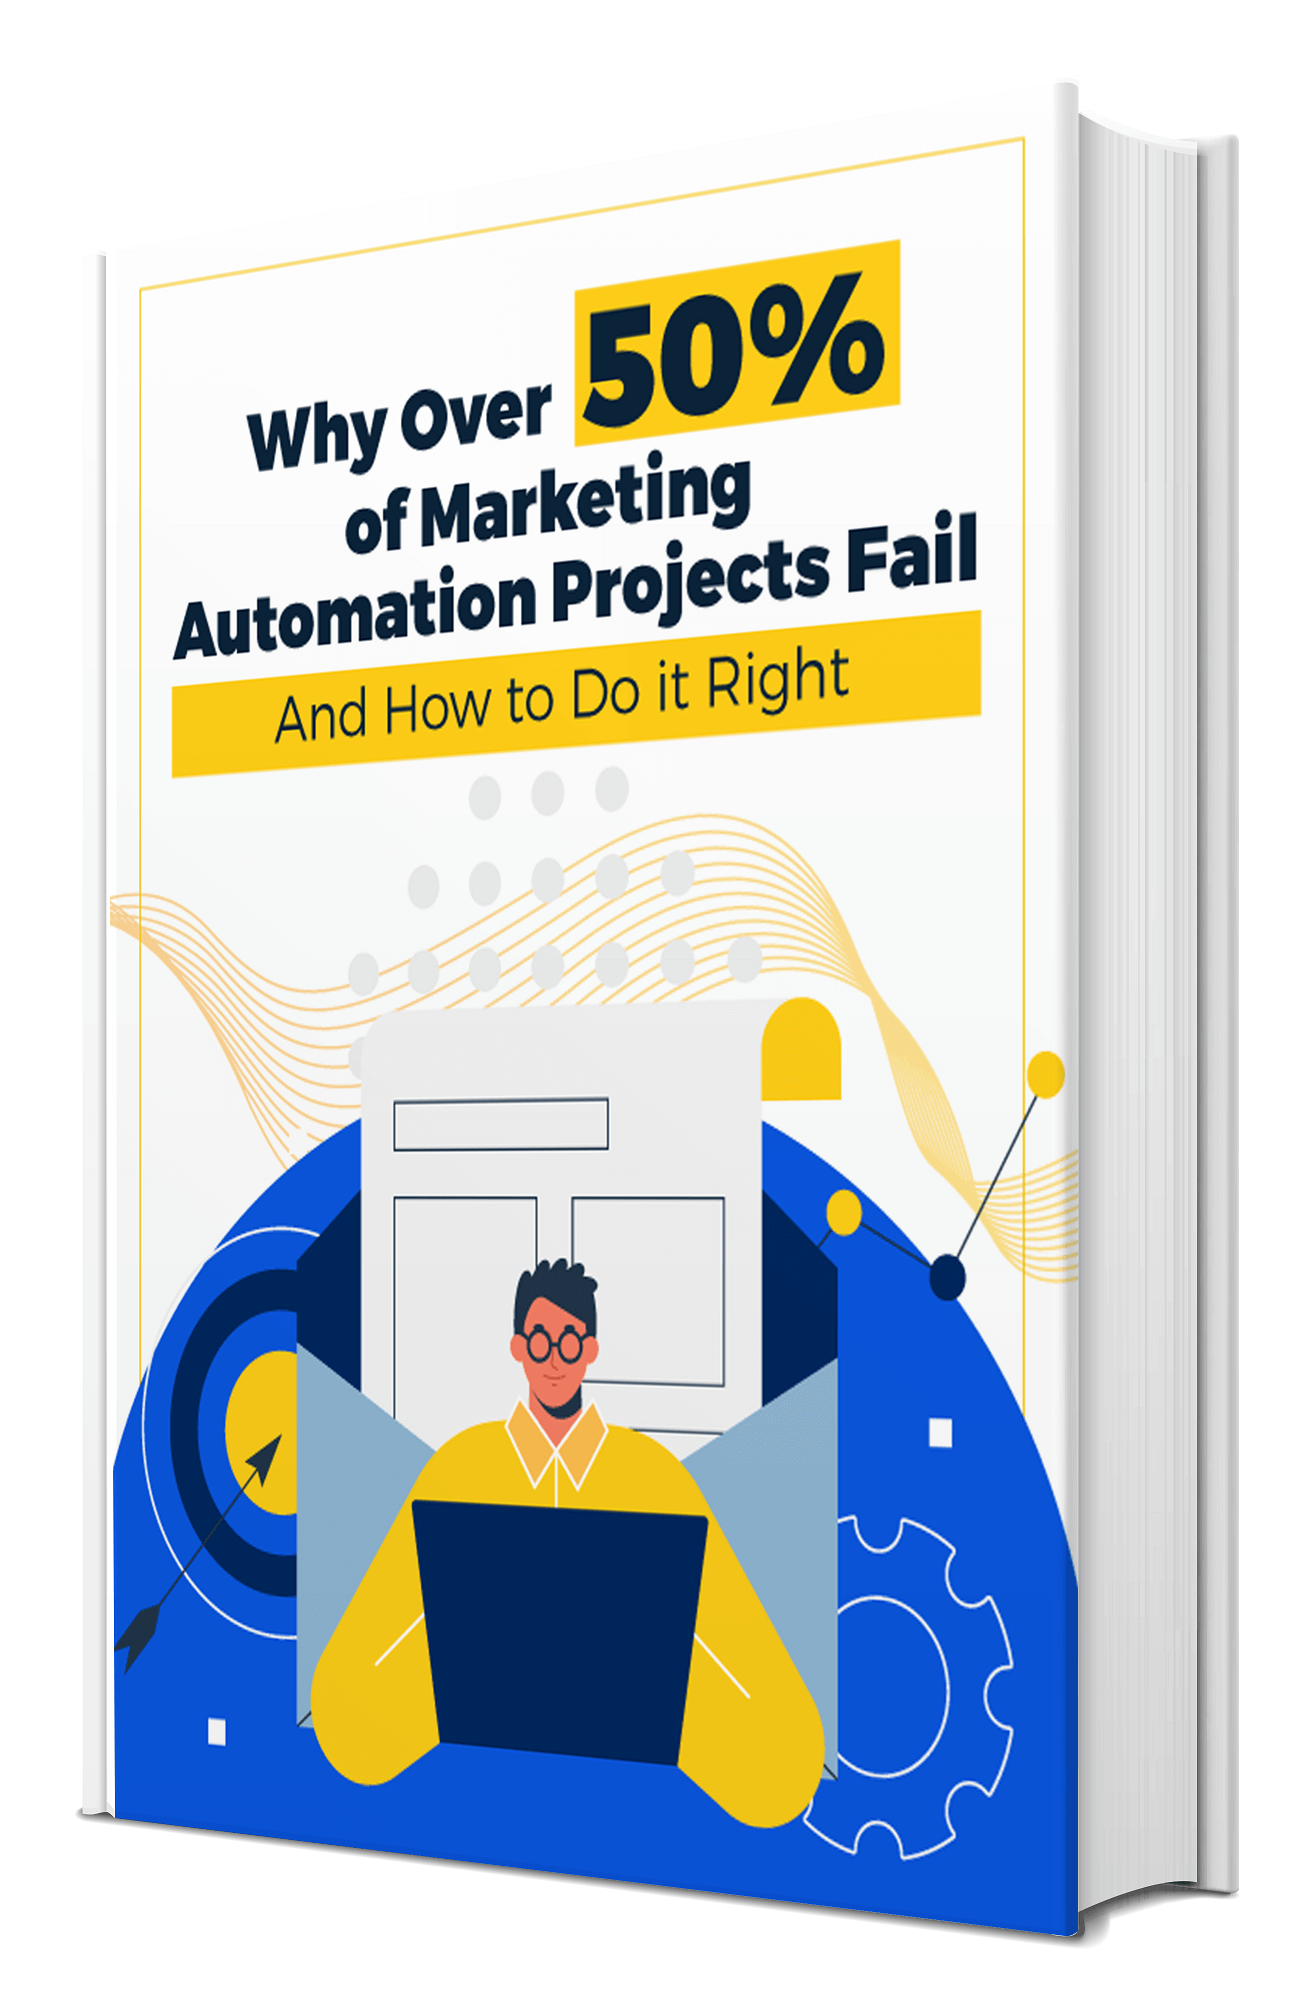 Why Over 50% of Marketing Automation Projects Fail (and How to Do It Right)